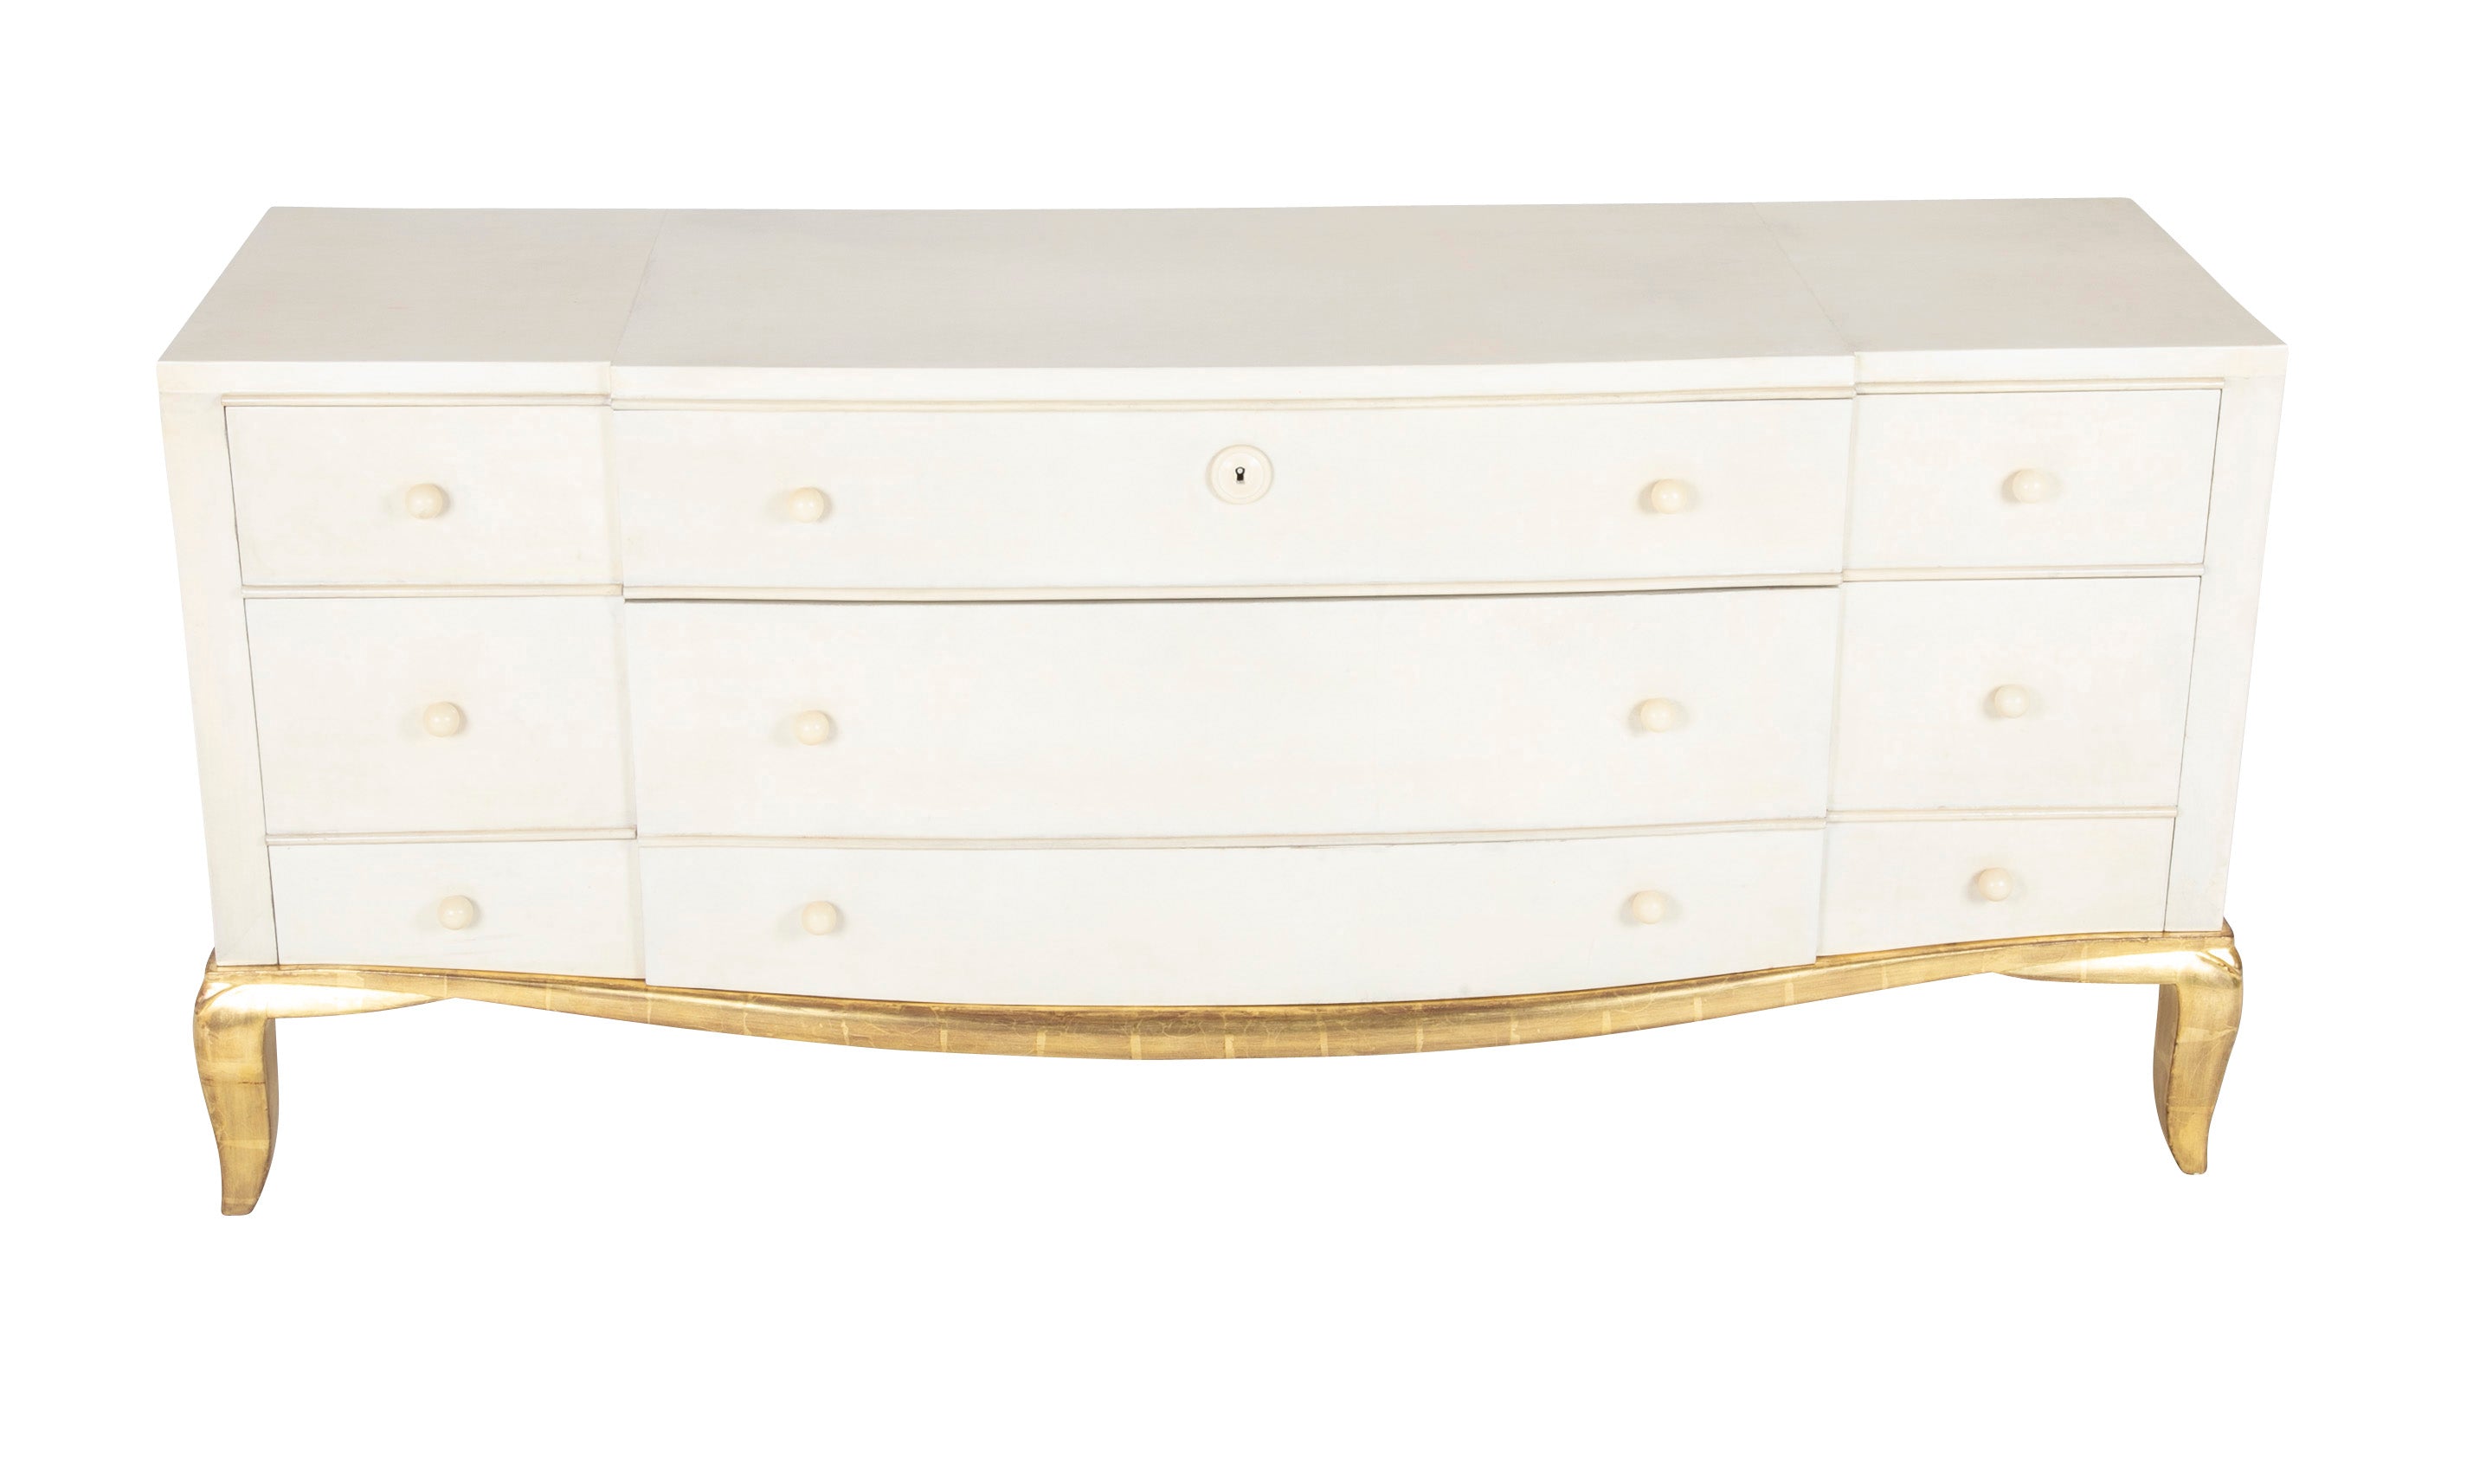 A Parchment & Lacquer Commode designed by Andre Arbus Circa 1935